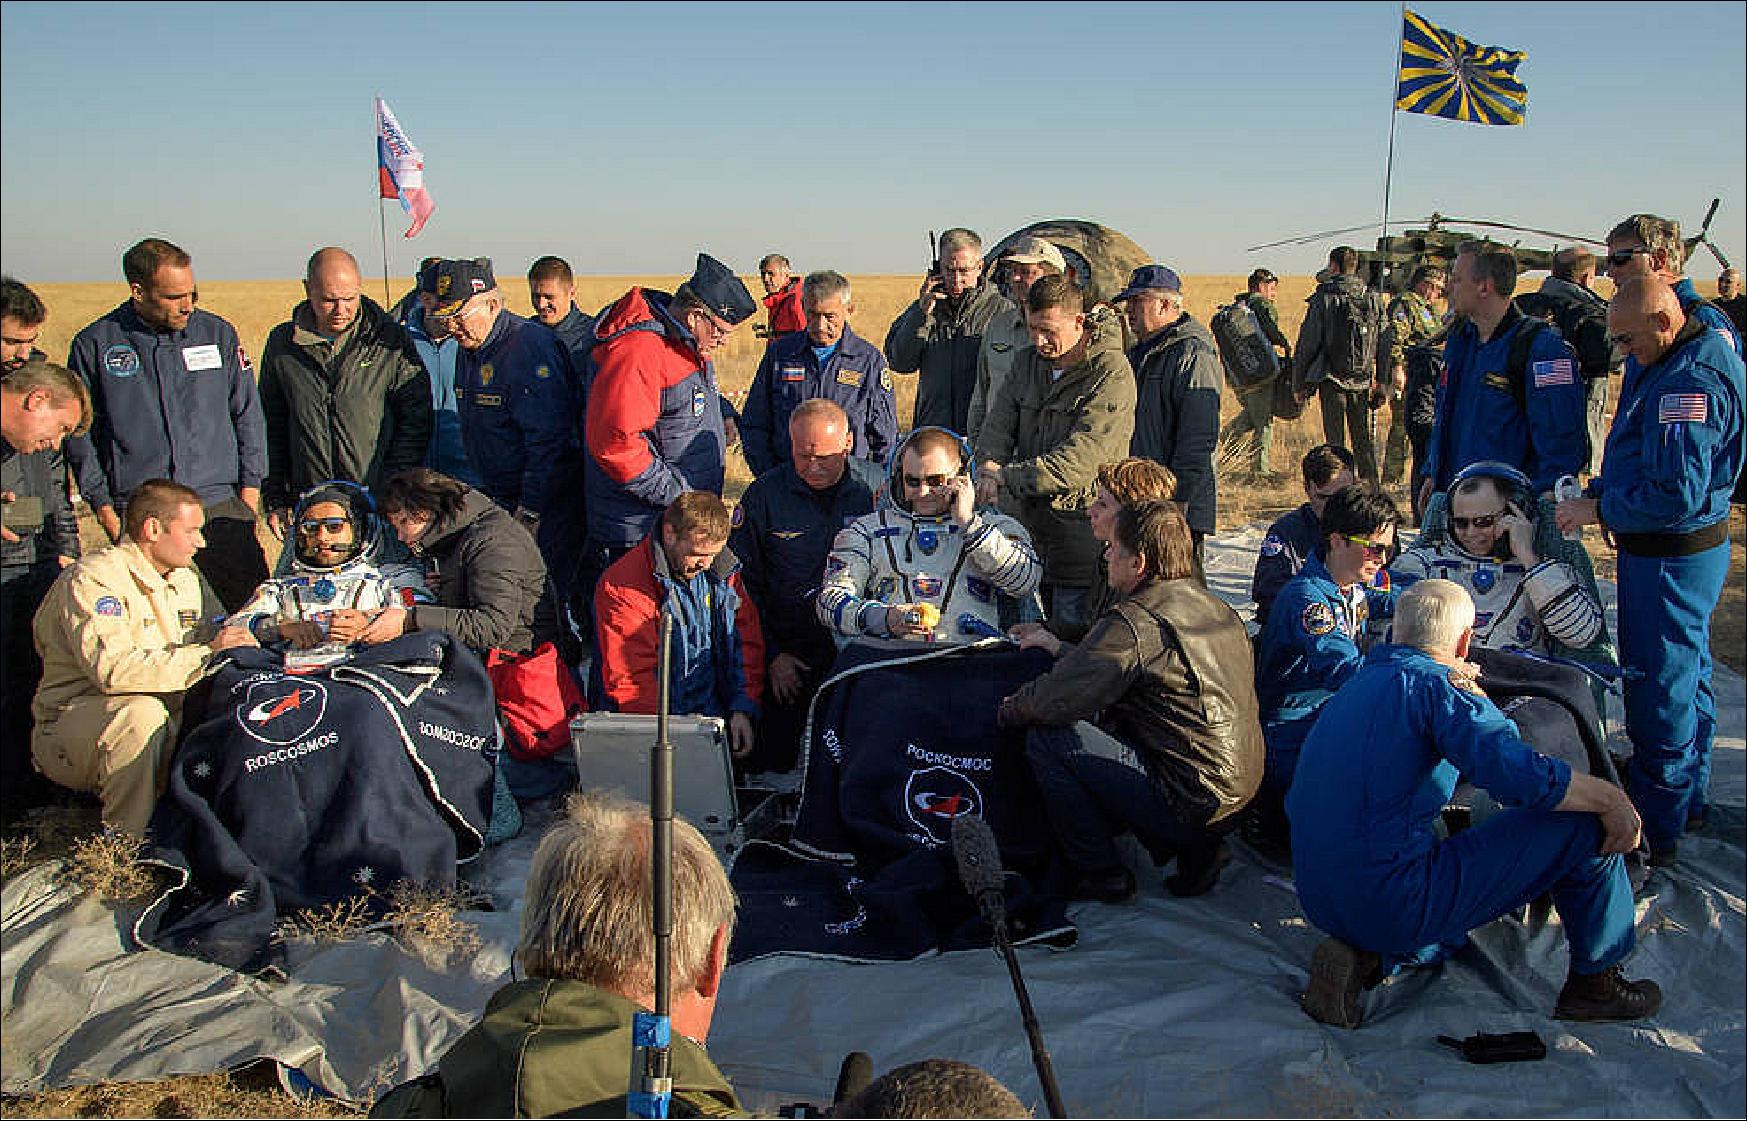 Figure 42: NASA astronaut Nick Hague, Russian cosmonaut Alexey Ovchinin and visiting astronaut from United Arab Emirates (UAE) Hazzaa Ali Almansoori returned to Earth from the International Space Station at 6:59 am in Kazakhstan (image credit: NASA)